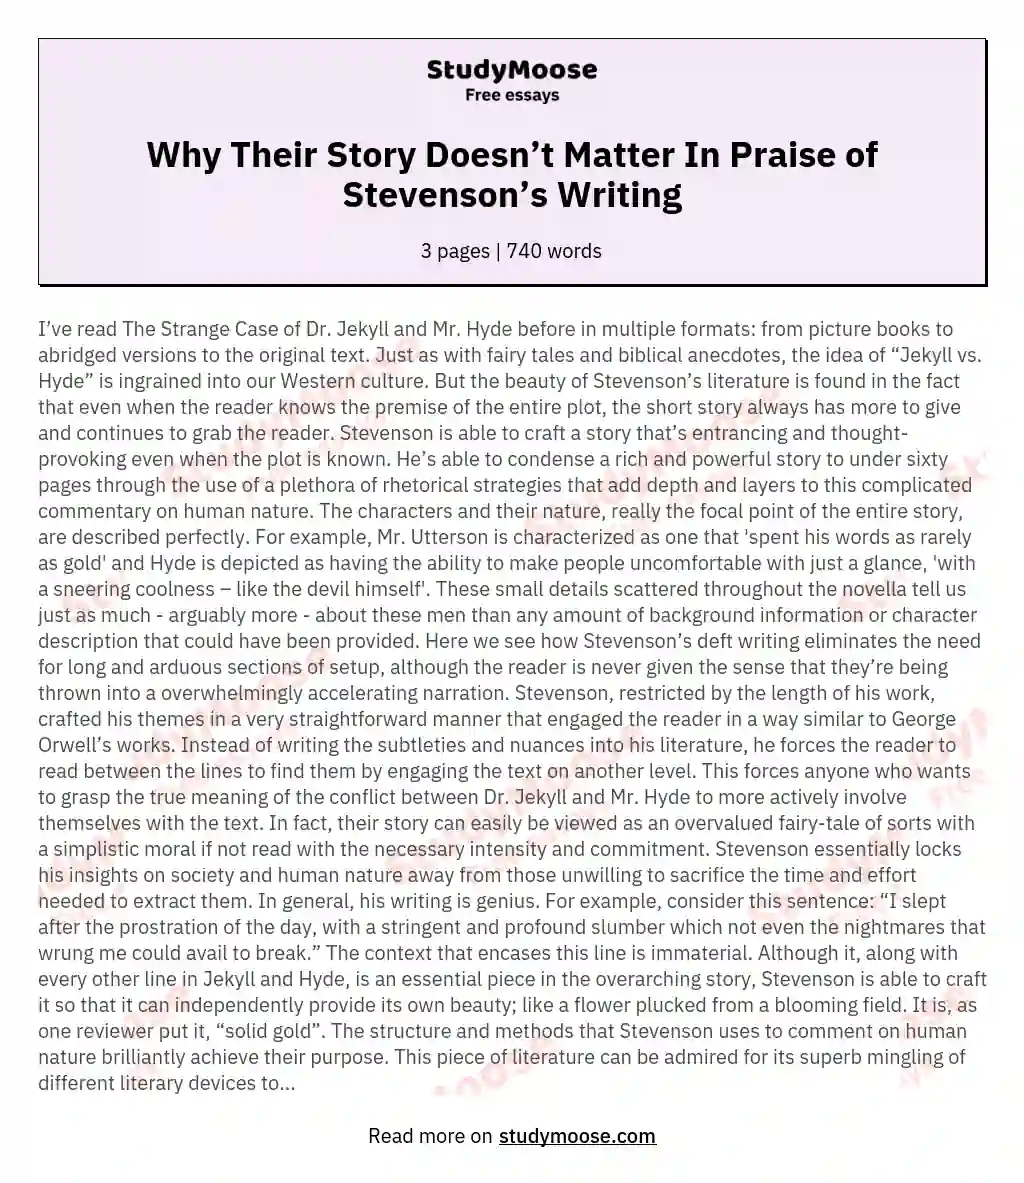 Why Their Story Doesn’t Matter In Praise of Stevenson’s Writing essay